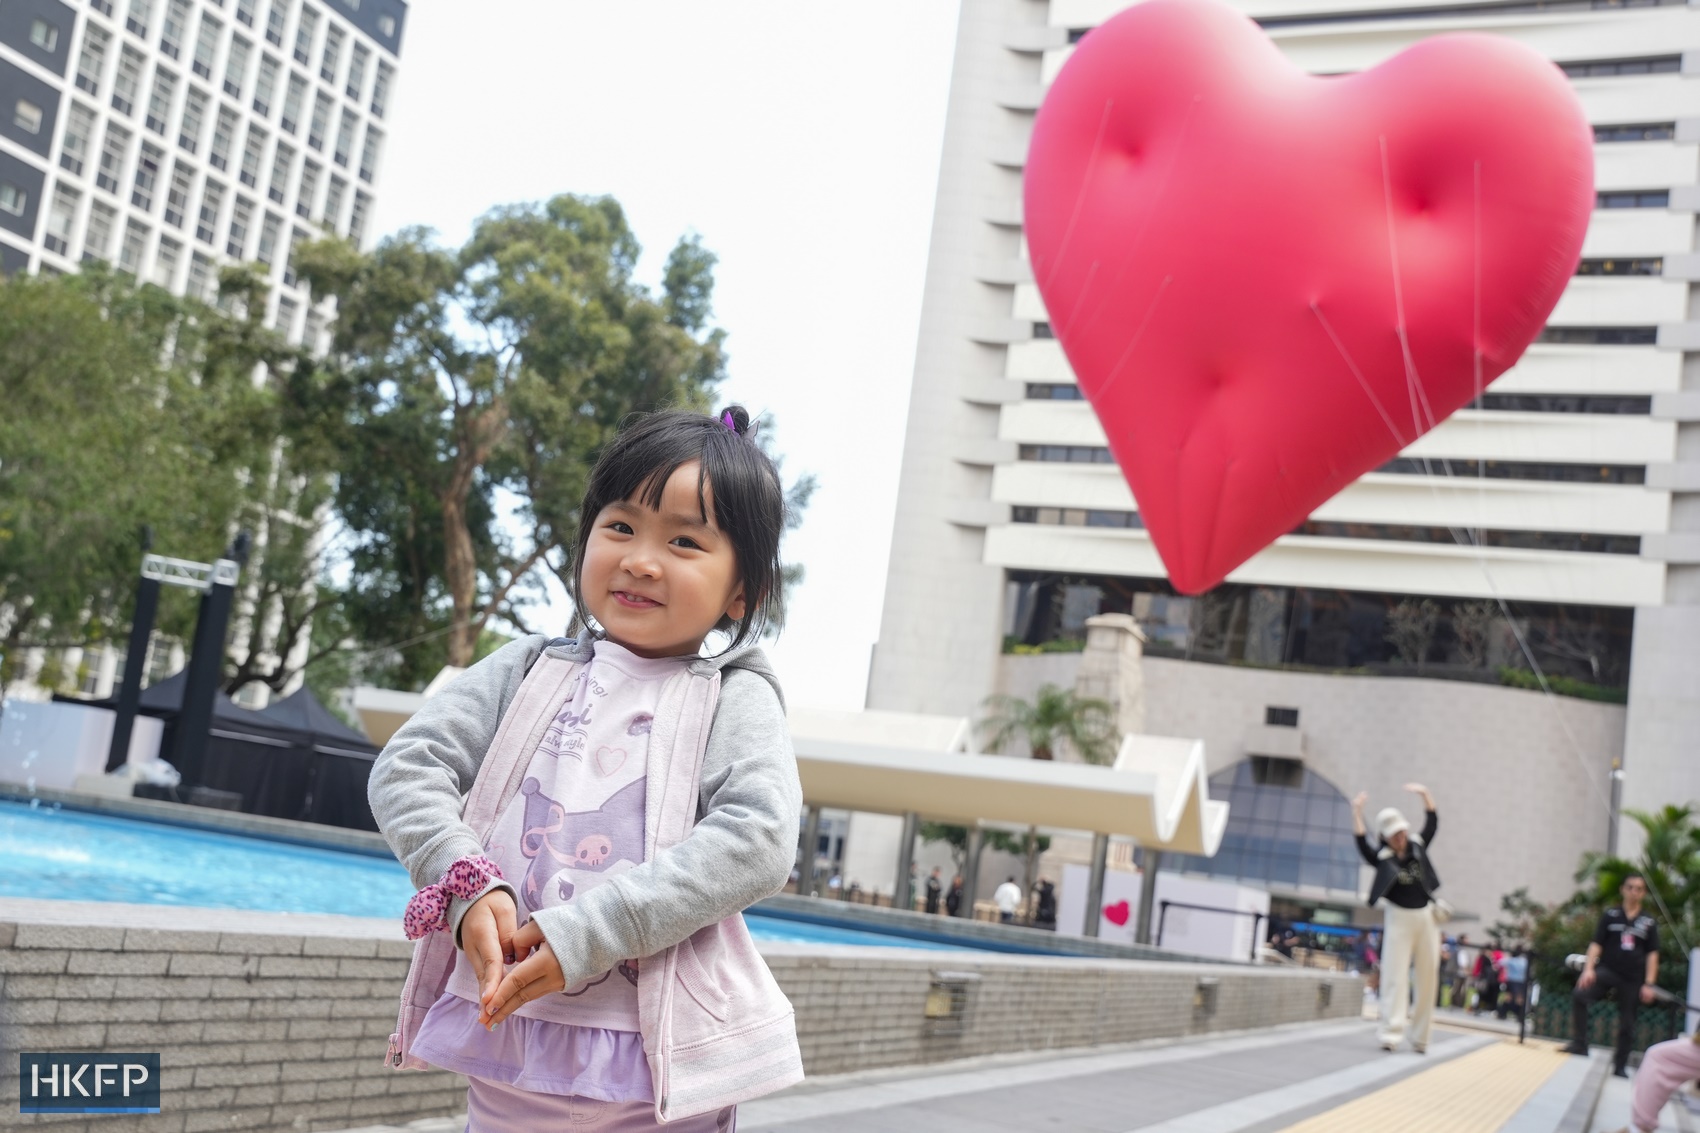 The Chubby Hearts Hong Kong Launch Event at Statue Square Gardens, Central, on February 14, 2024. Photo: Kyle Lam/HKFP.